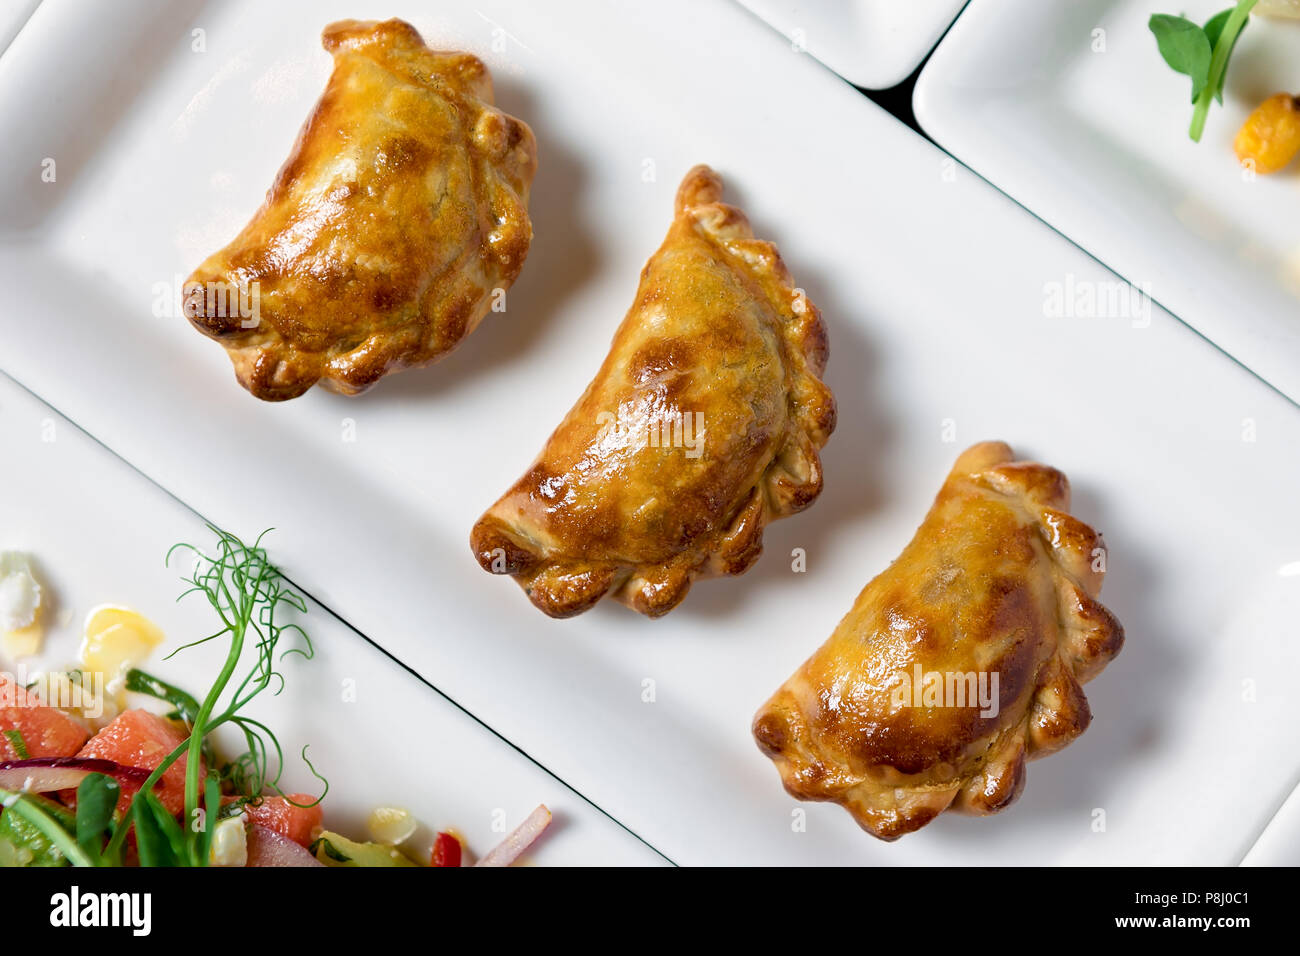 Plate of bite size meat patties Stock Photo